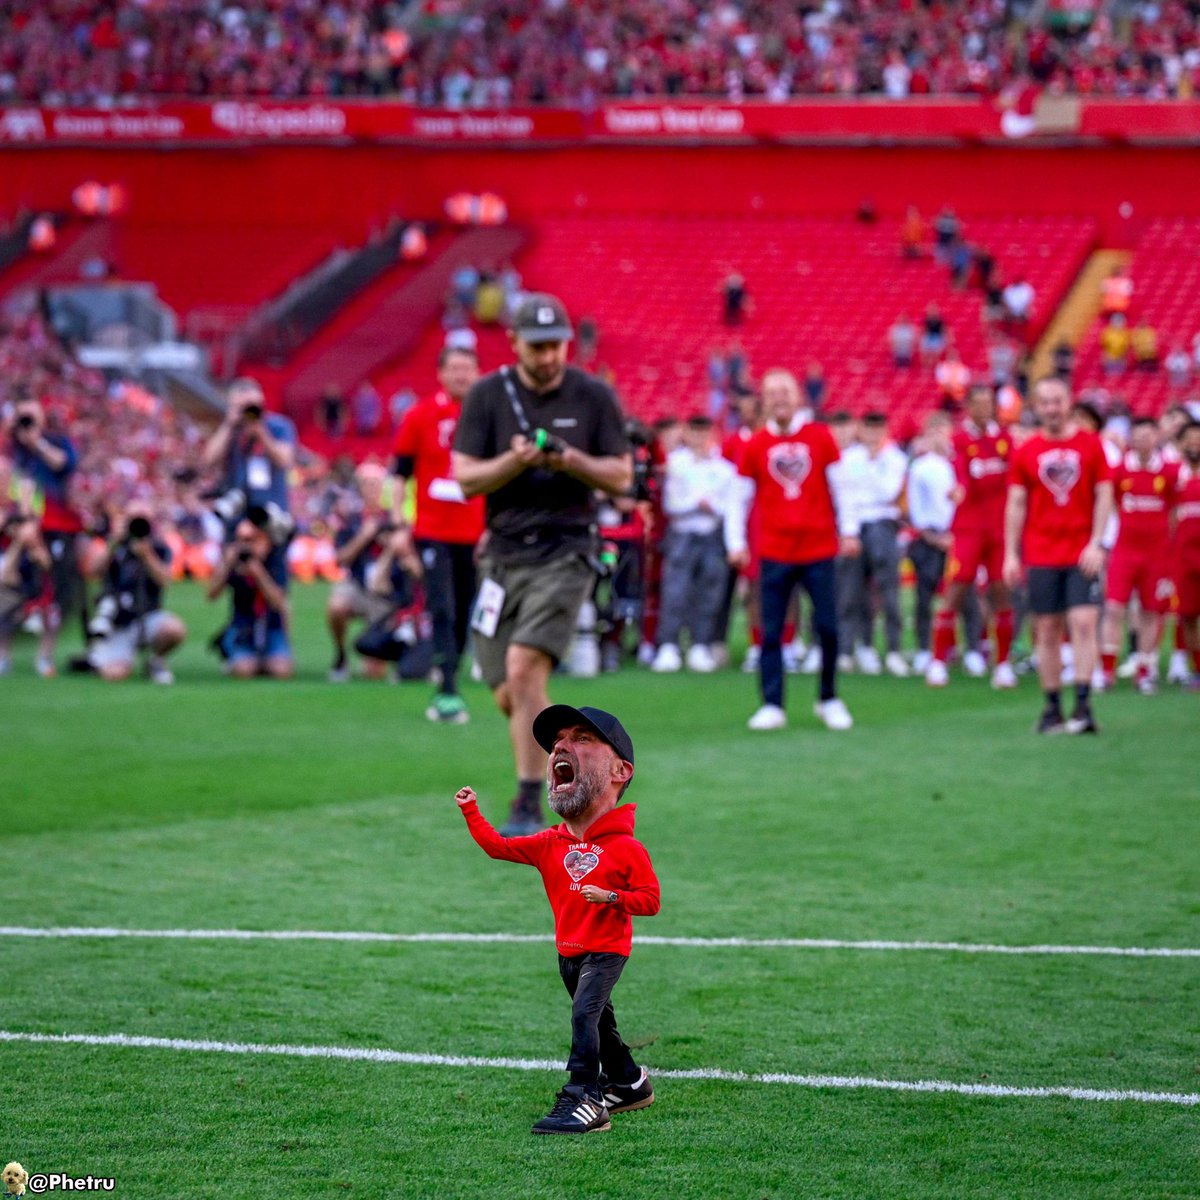 🔥 J Ü R G E N   K L O P P 🔥

Jürgen Klopp leaves Liverpool after legendary era with 8 titles! 

🏆 Premier League 2020
🏆 Champions League 2019
🏆 Club’s World Cup 2019
🏆 UEFA Super Cup 2019
🏆 FA Cup 2022
🏆 Community Shield 2022
🏆🏆 Carabao Cup 2022, 2024

LEGEND. 👑 🧔🏼‍♂️